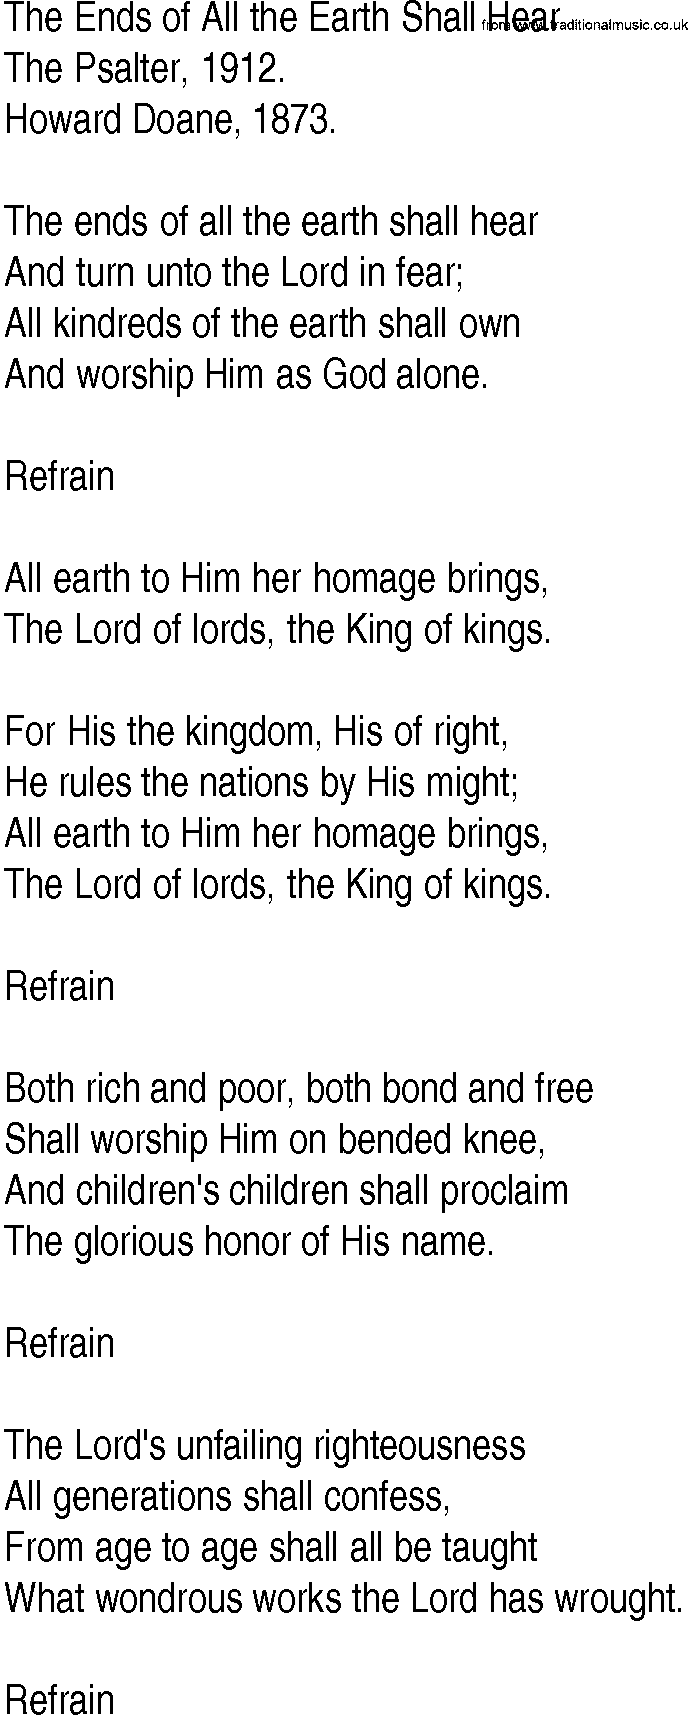 Hymn and Gospel Song: The Ends of All the Earth Shall Hear by The Psalter lyrics